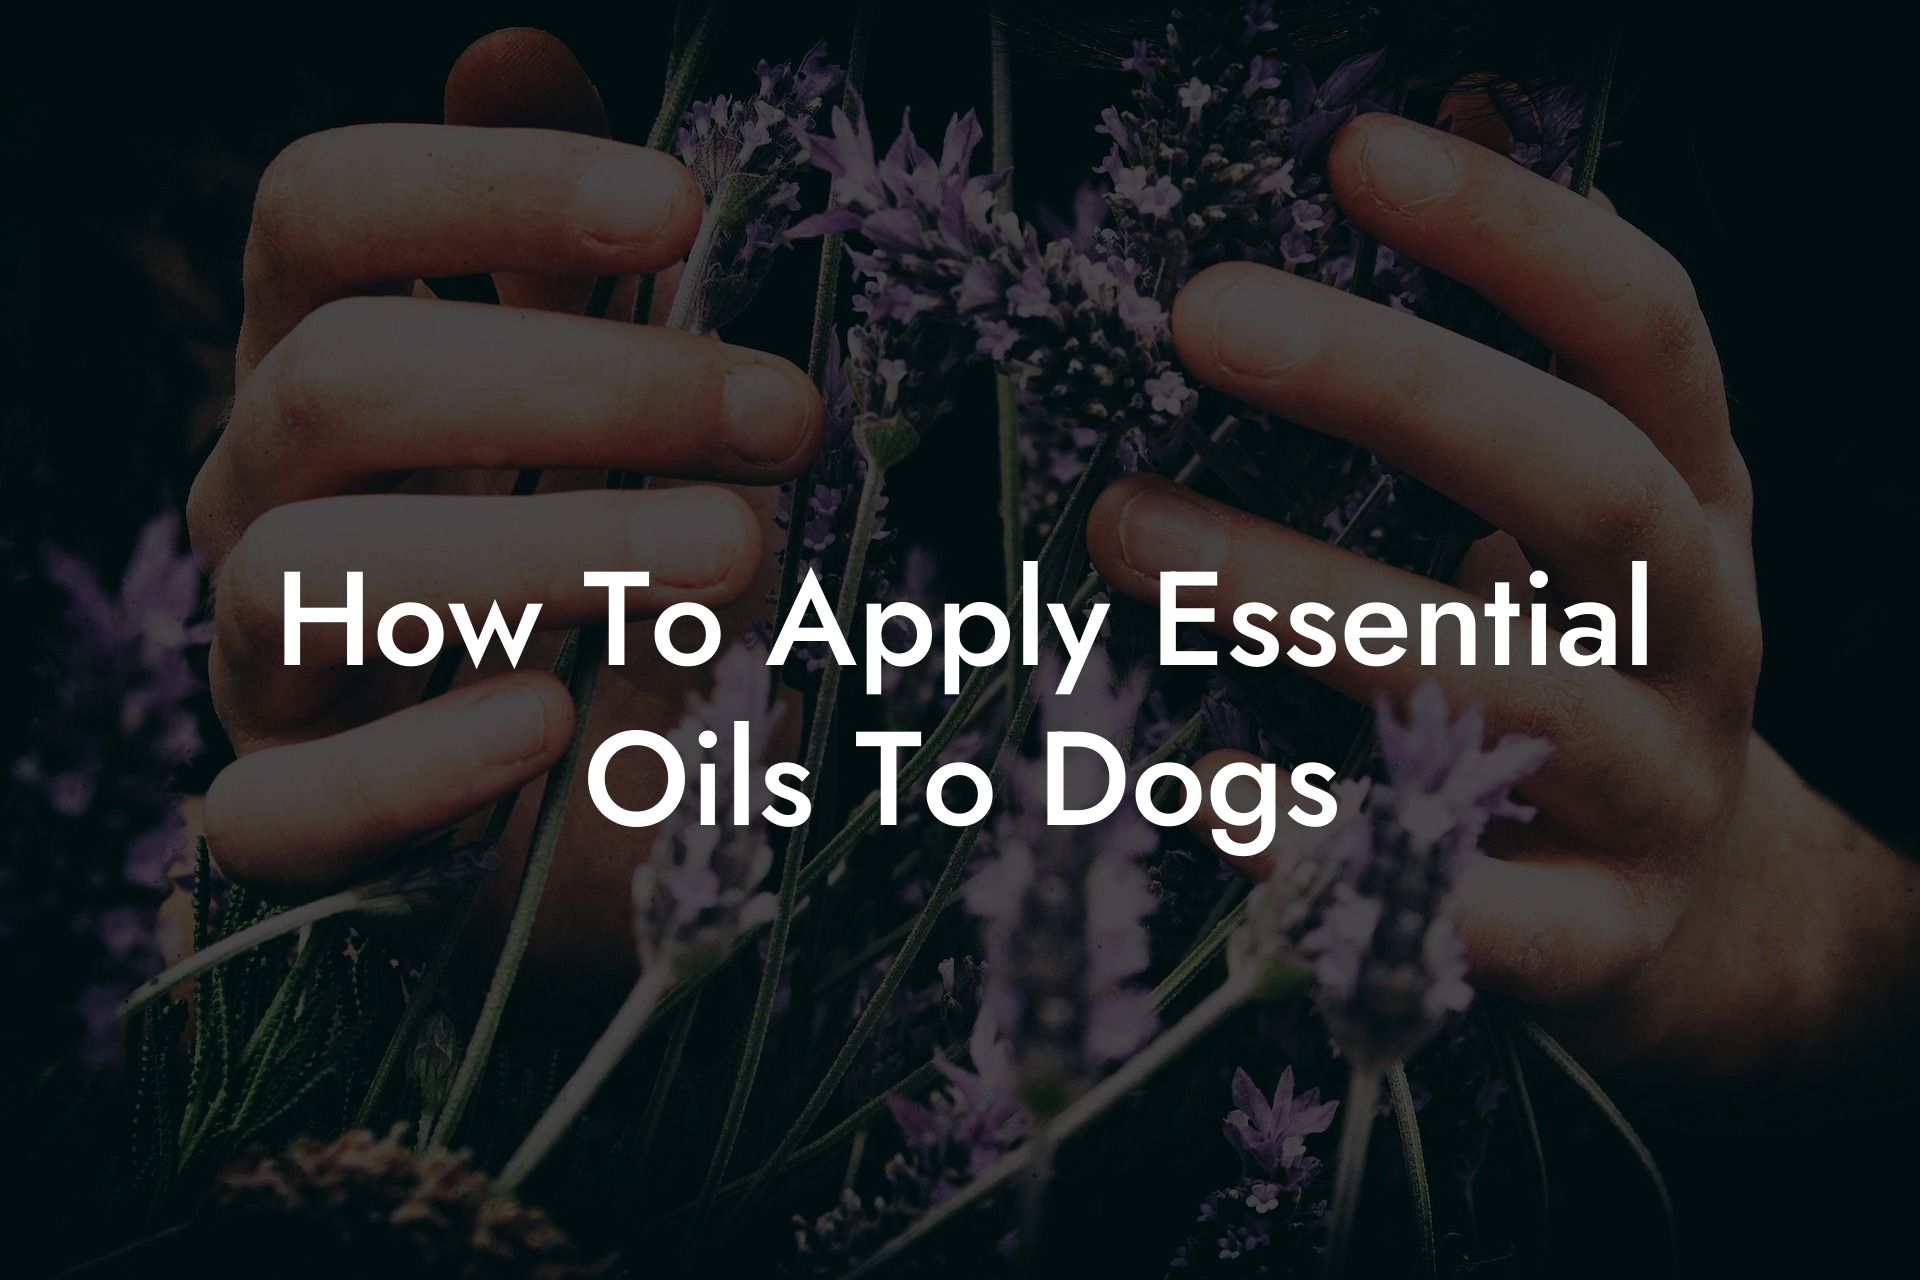 How To Apply Essential Oils To Dogs